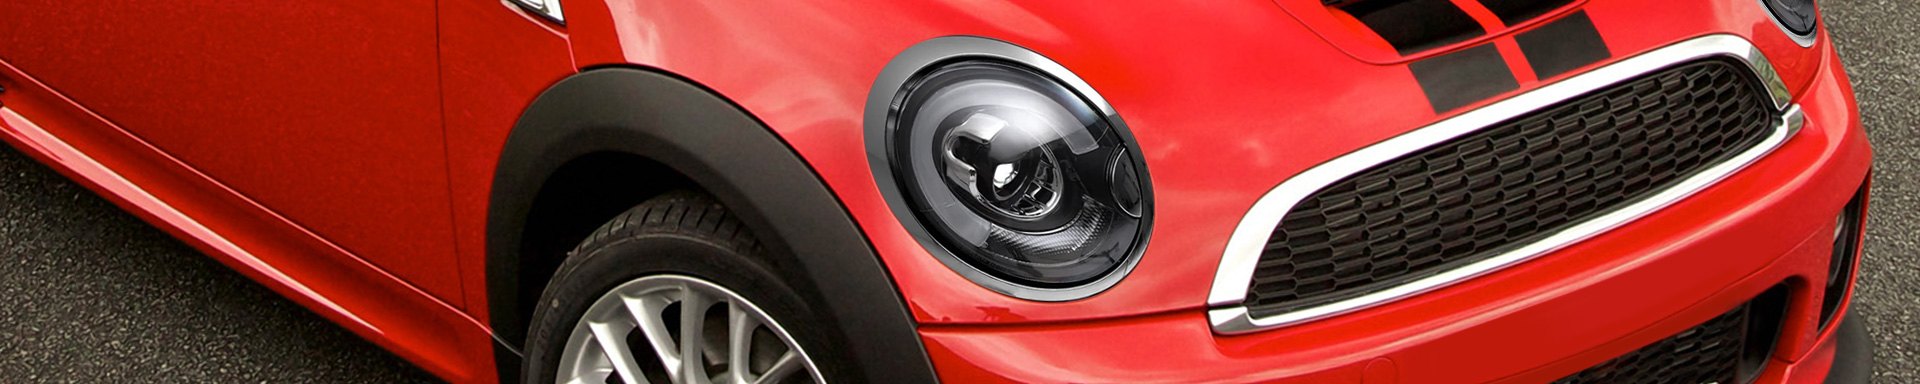 Light Up The Road Ahead With New Spyder LED Headlights For 07-12 Mini Cooper 